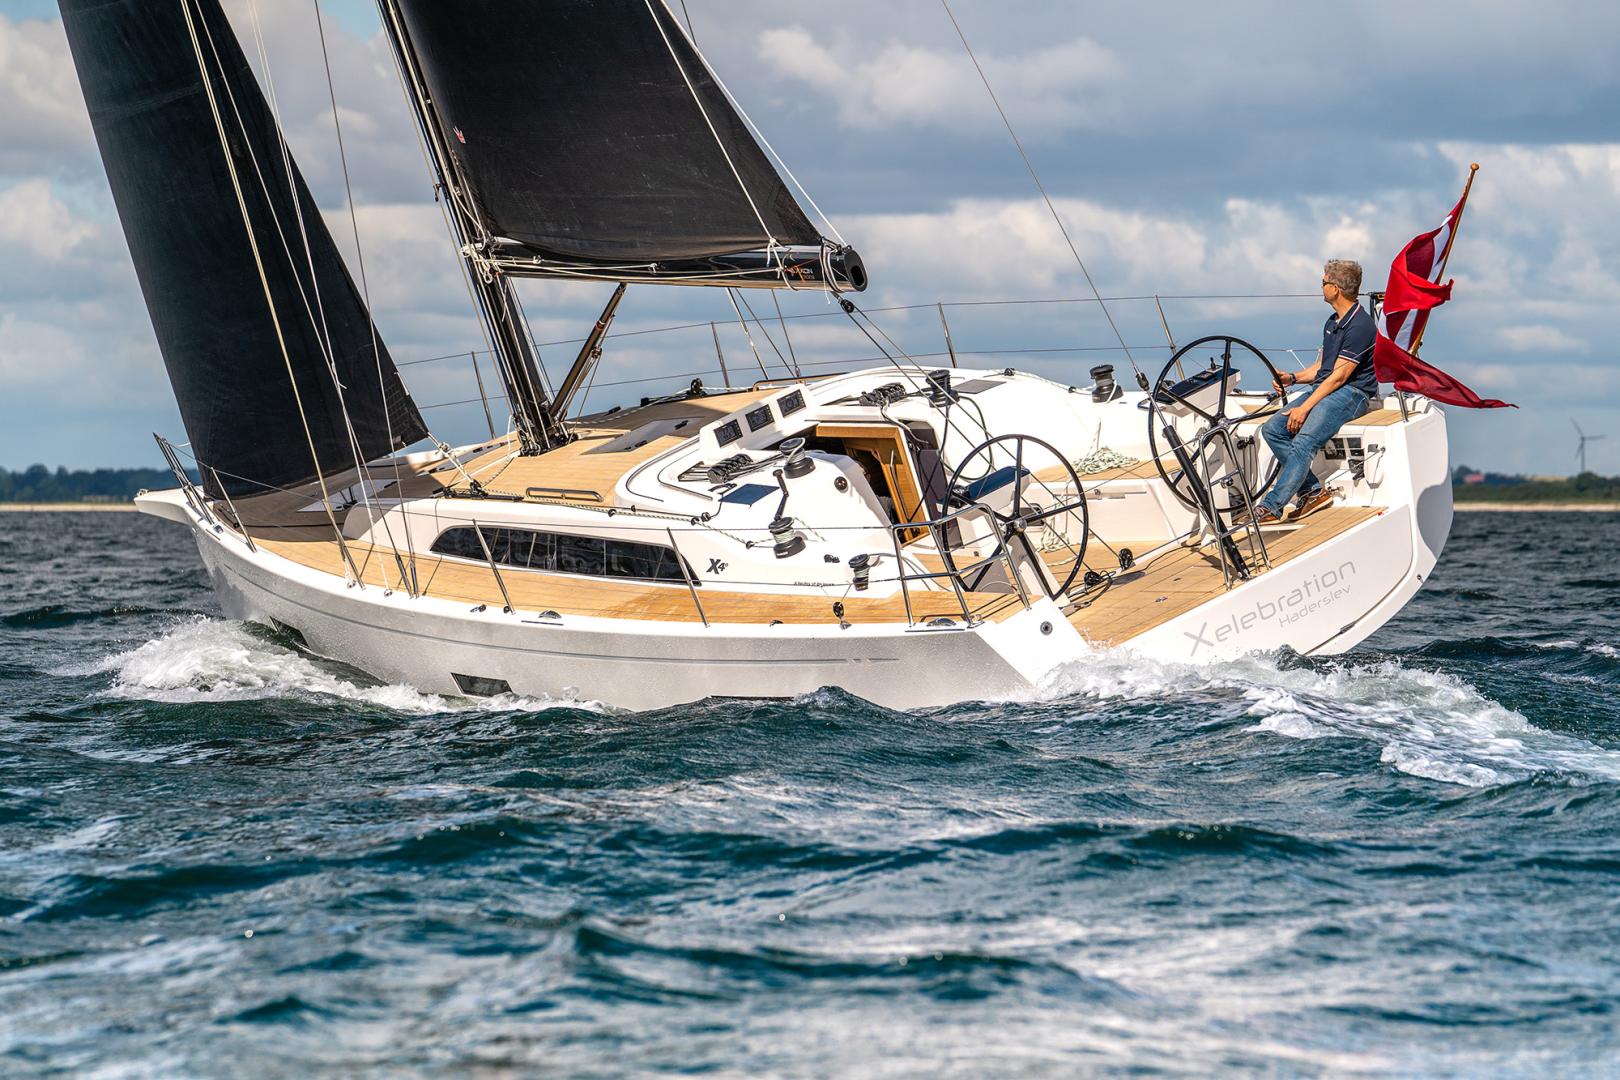 X-Yachts launched the smallest member of the Pure X Range, the X40